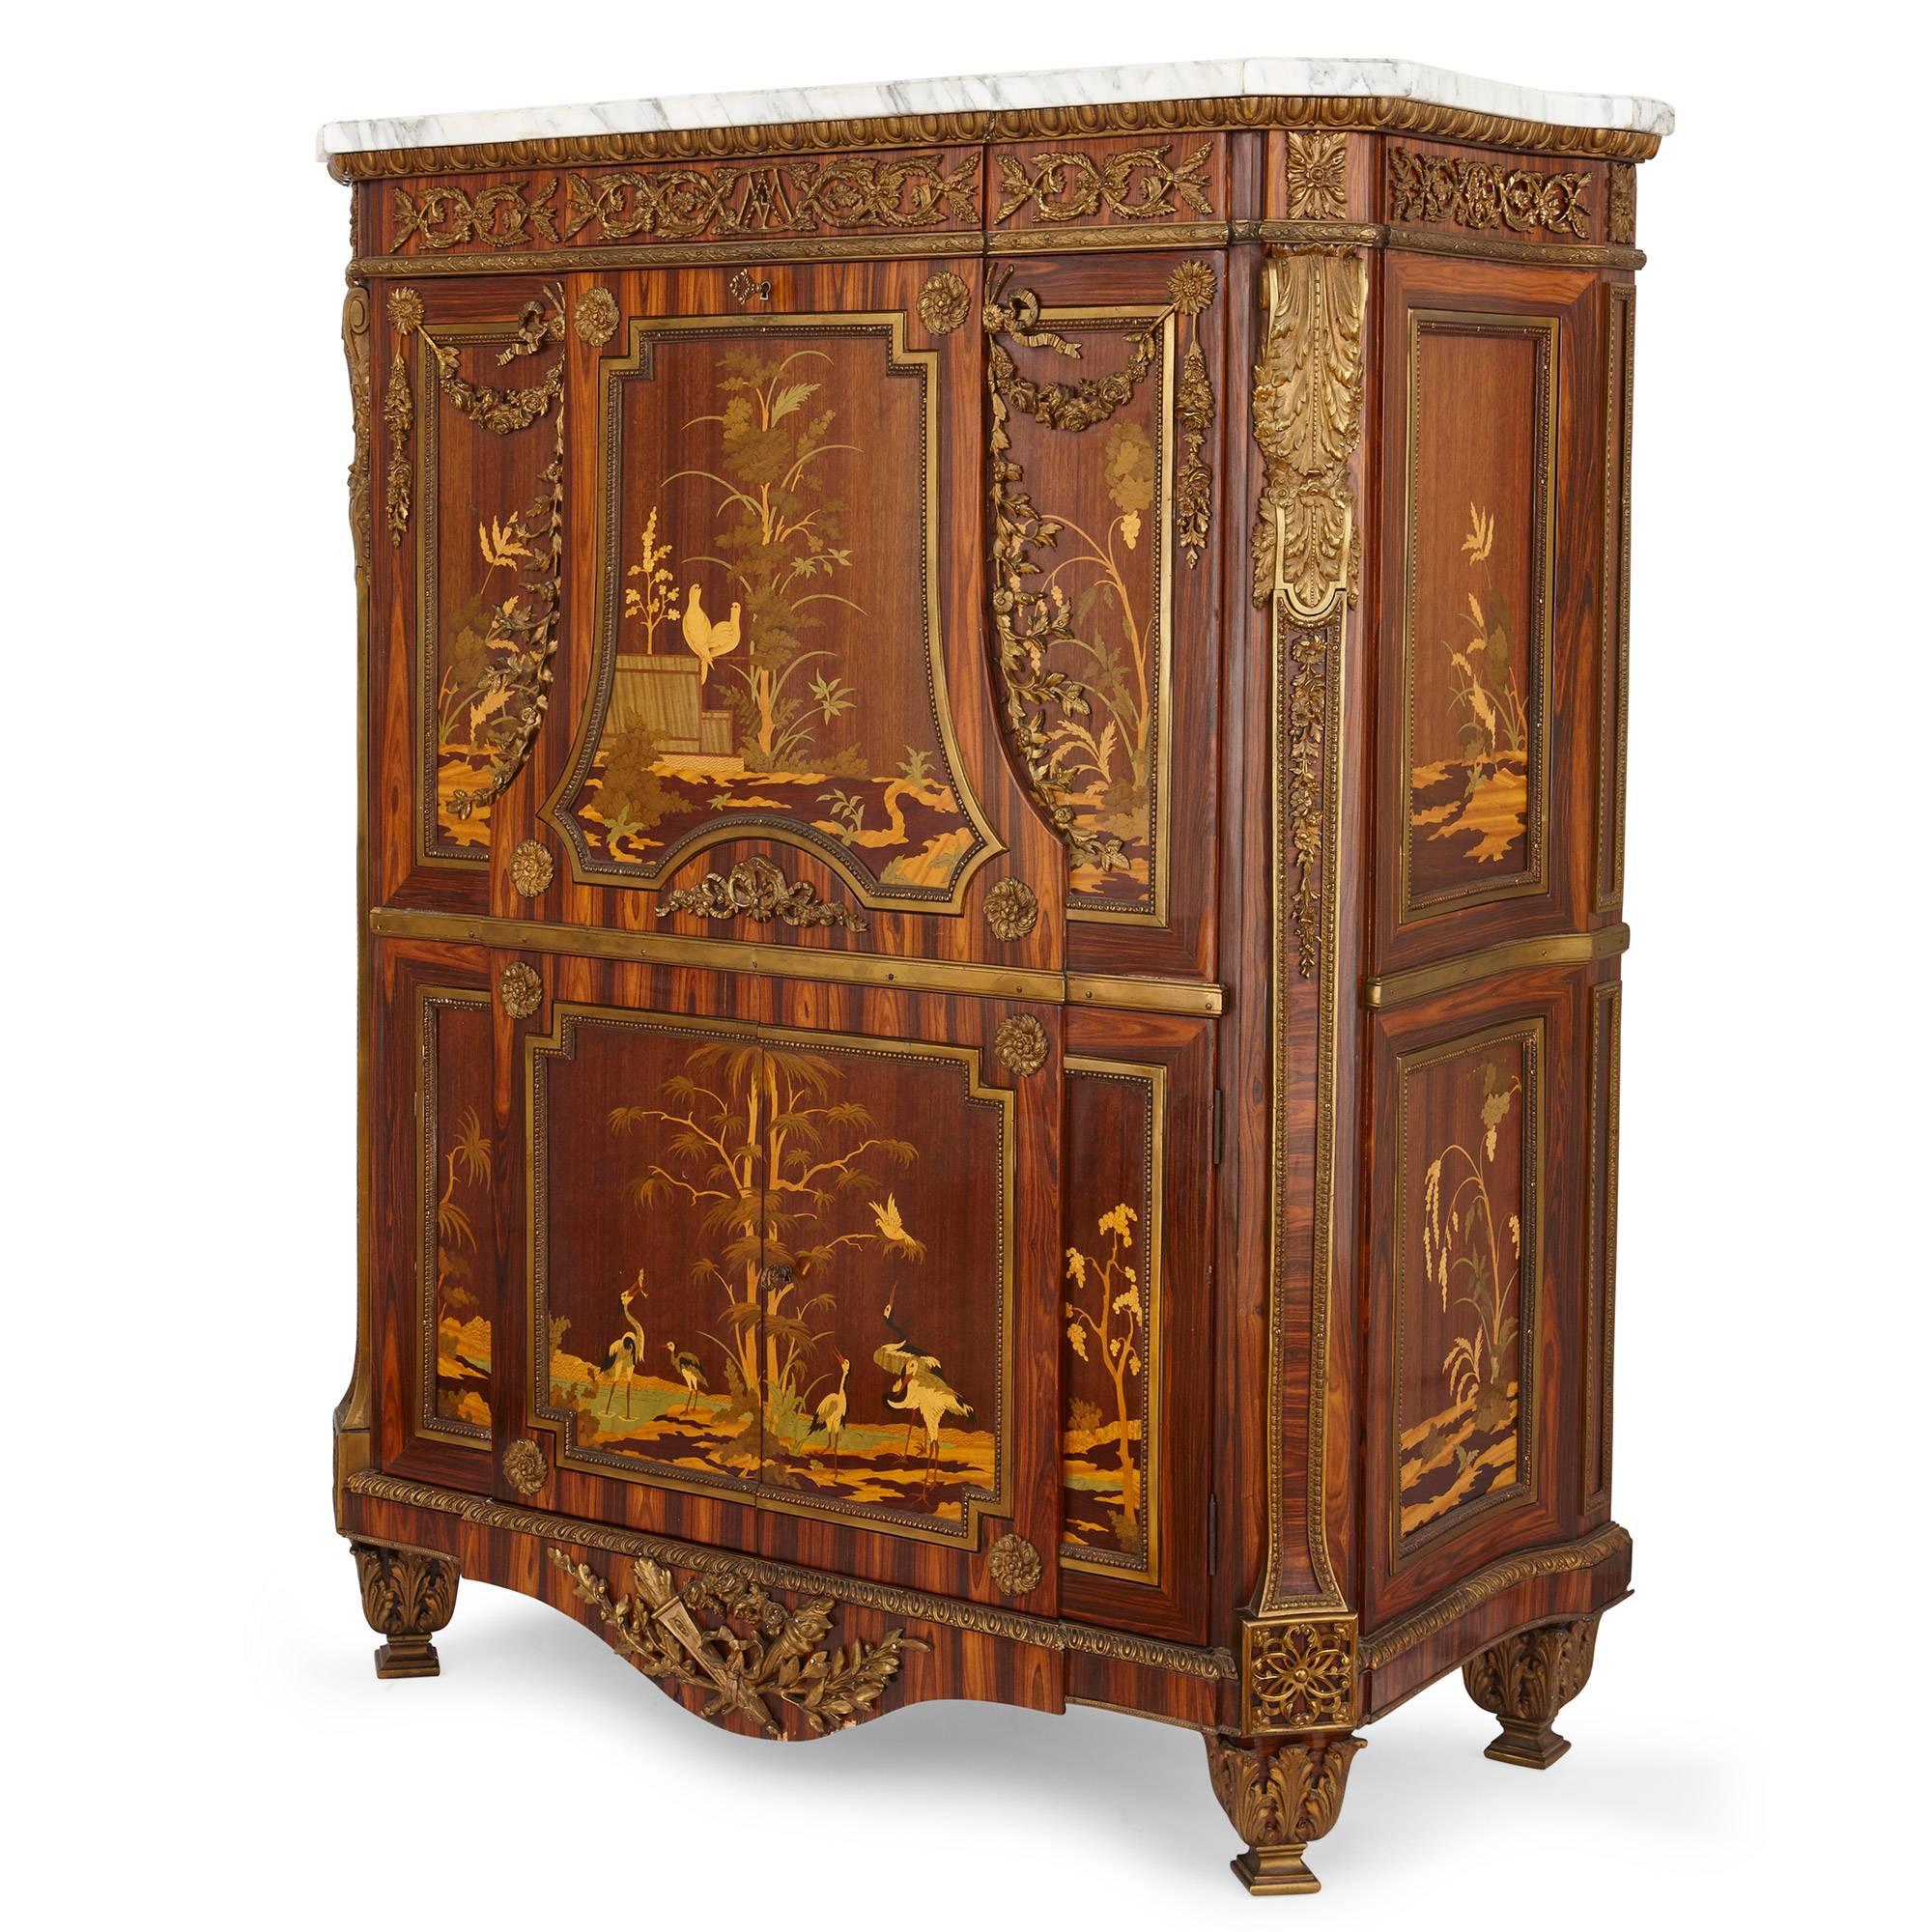 This fine antique secrétaire displays exceptional attention to detail, with exquisite marquetry detailing and gilt bronze mounts. The marquetry work is especially vibrant and is used to create impressive scenes of nature incorporating trees, plants,